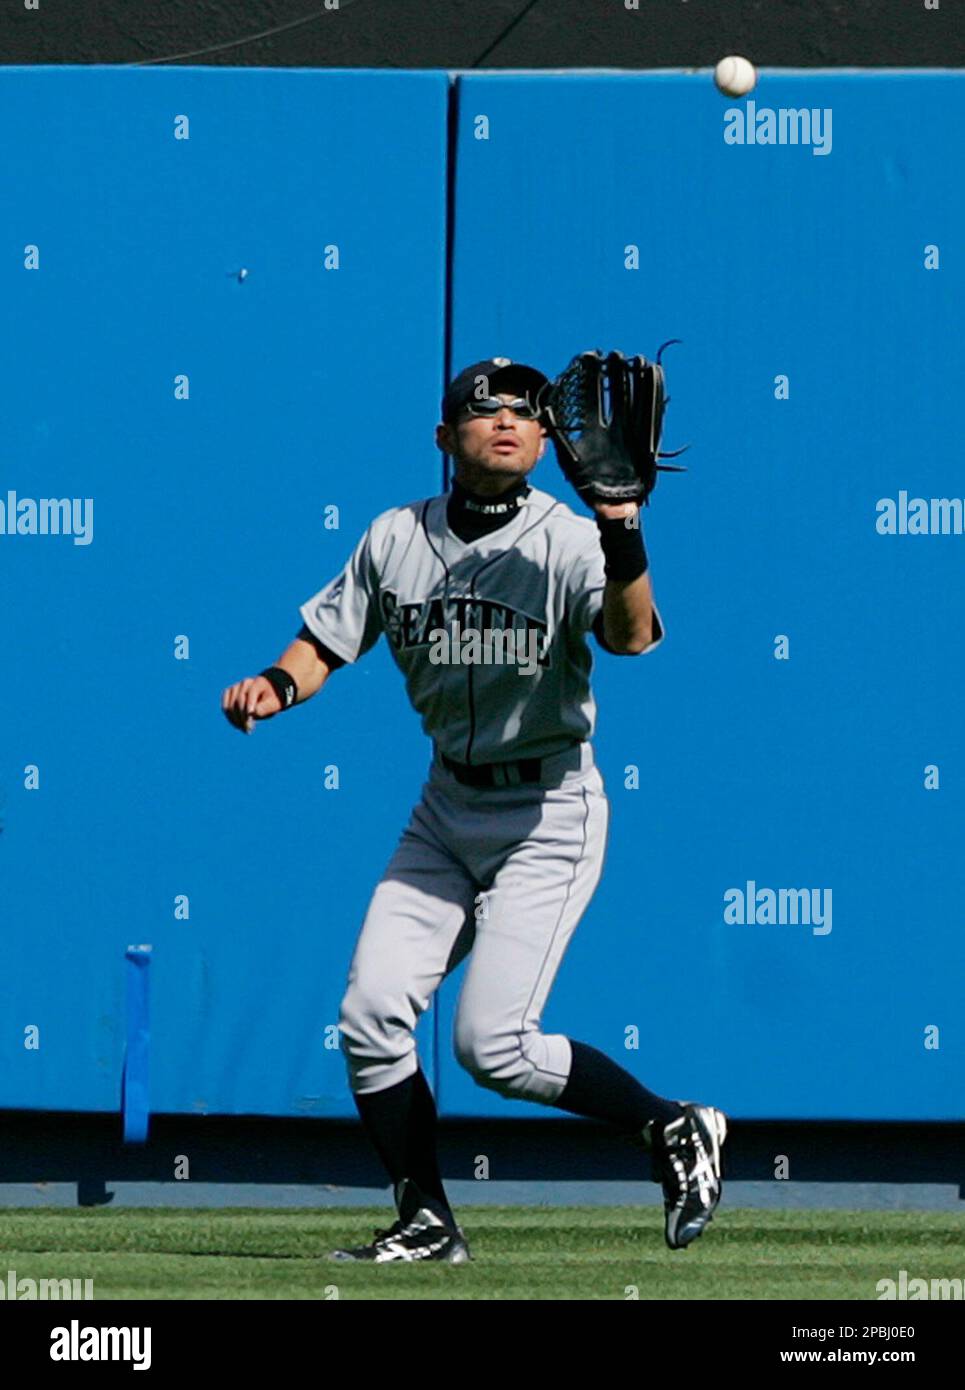 Seattle Mariners Ichiro Suzuki makes the catch on a fly ball hit by New  York Yankees' Hideki Matsui during the second inning in Major League  Baseball action Saturday, May 5, 2007 at